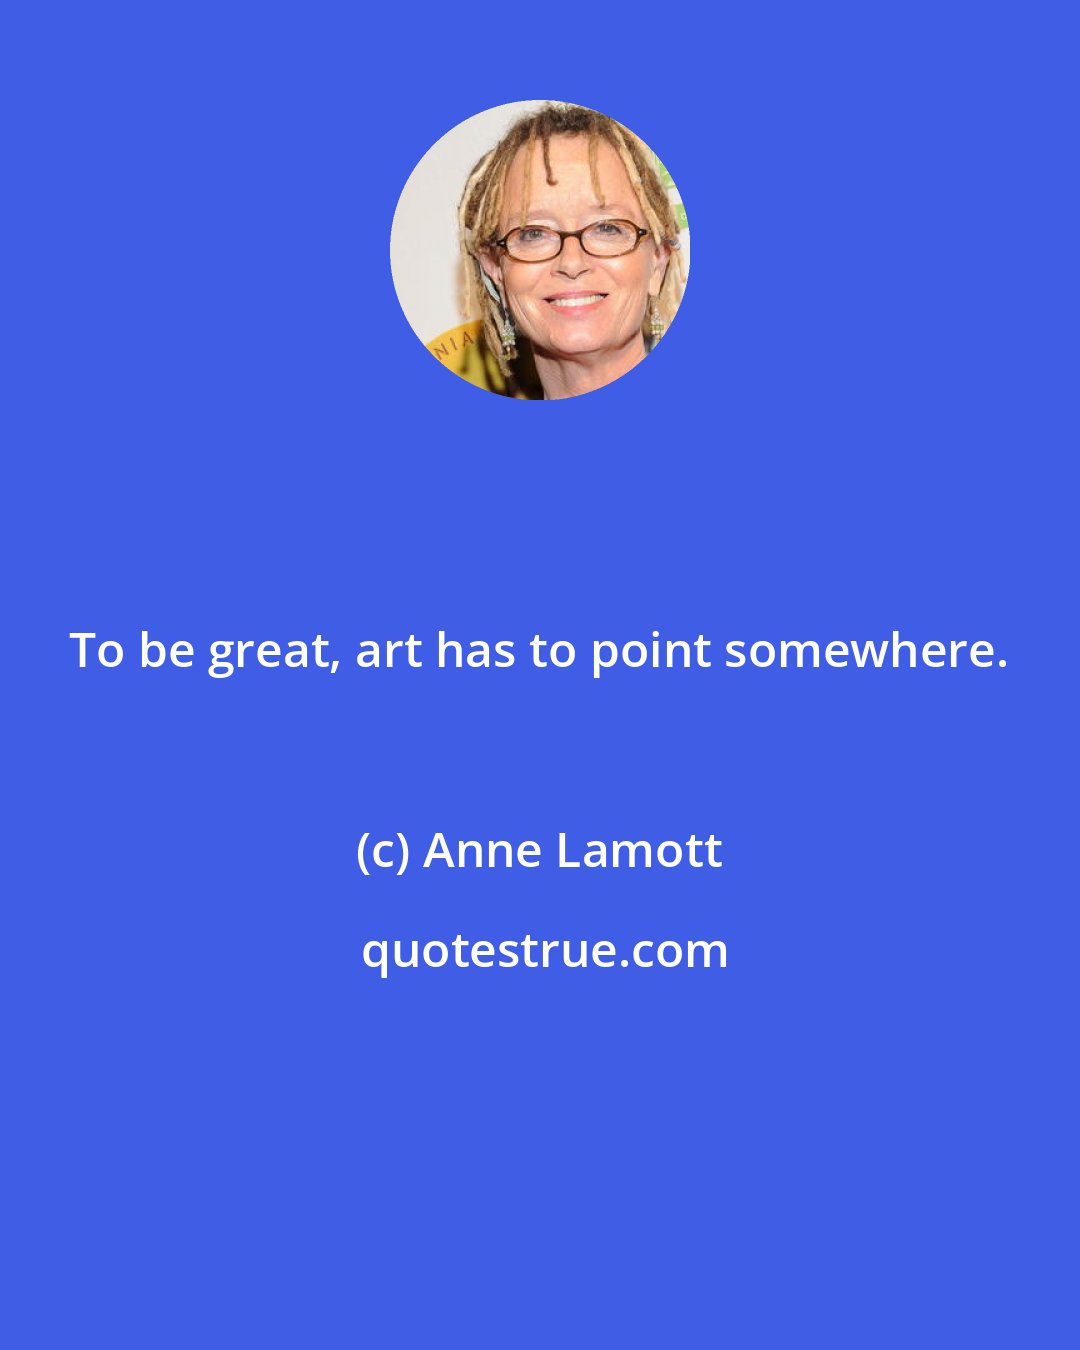 Anne Lamott: To be great, art has to point somewhere.